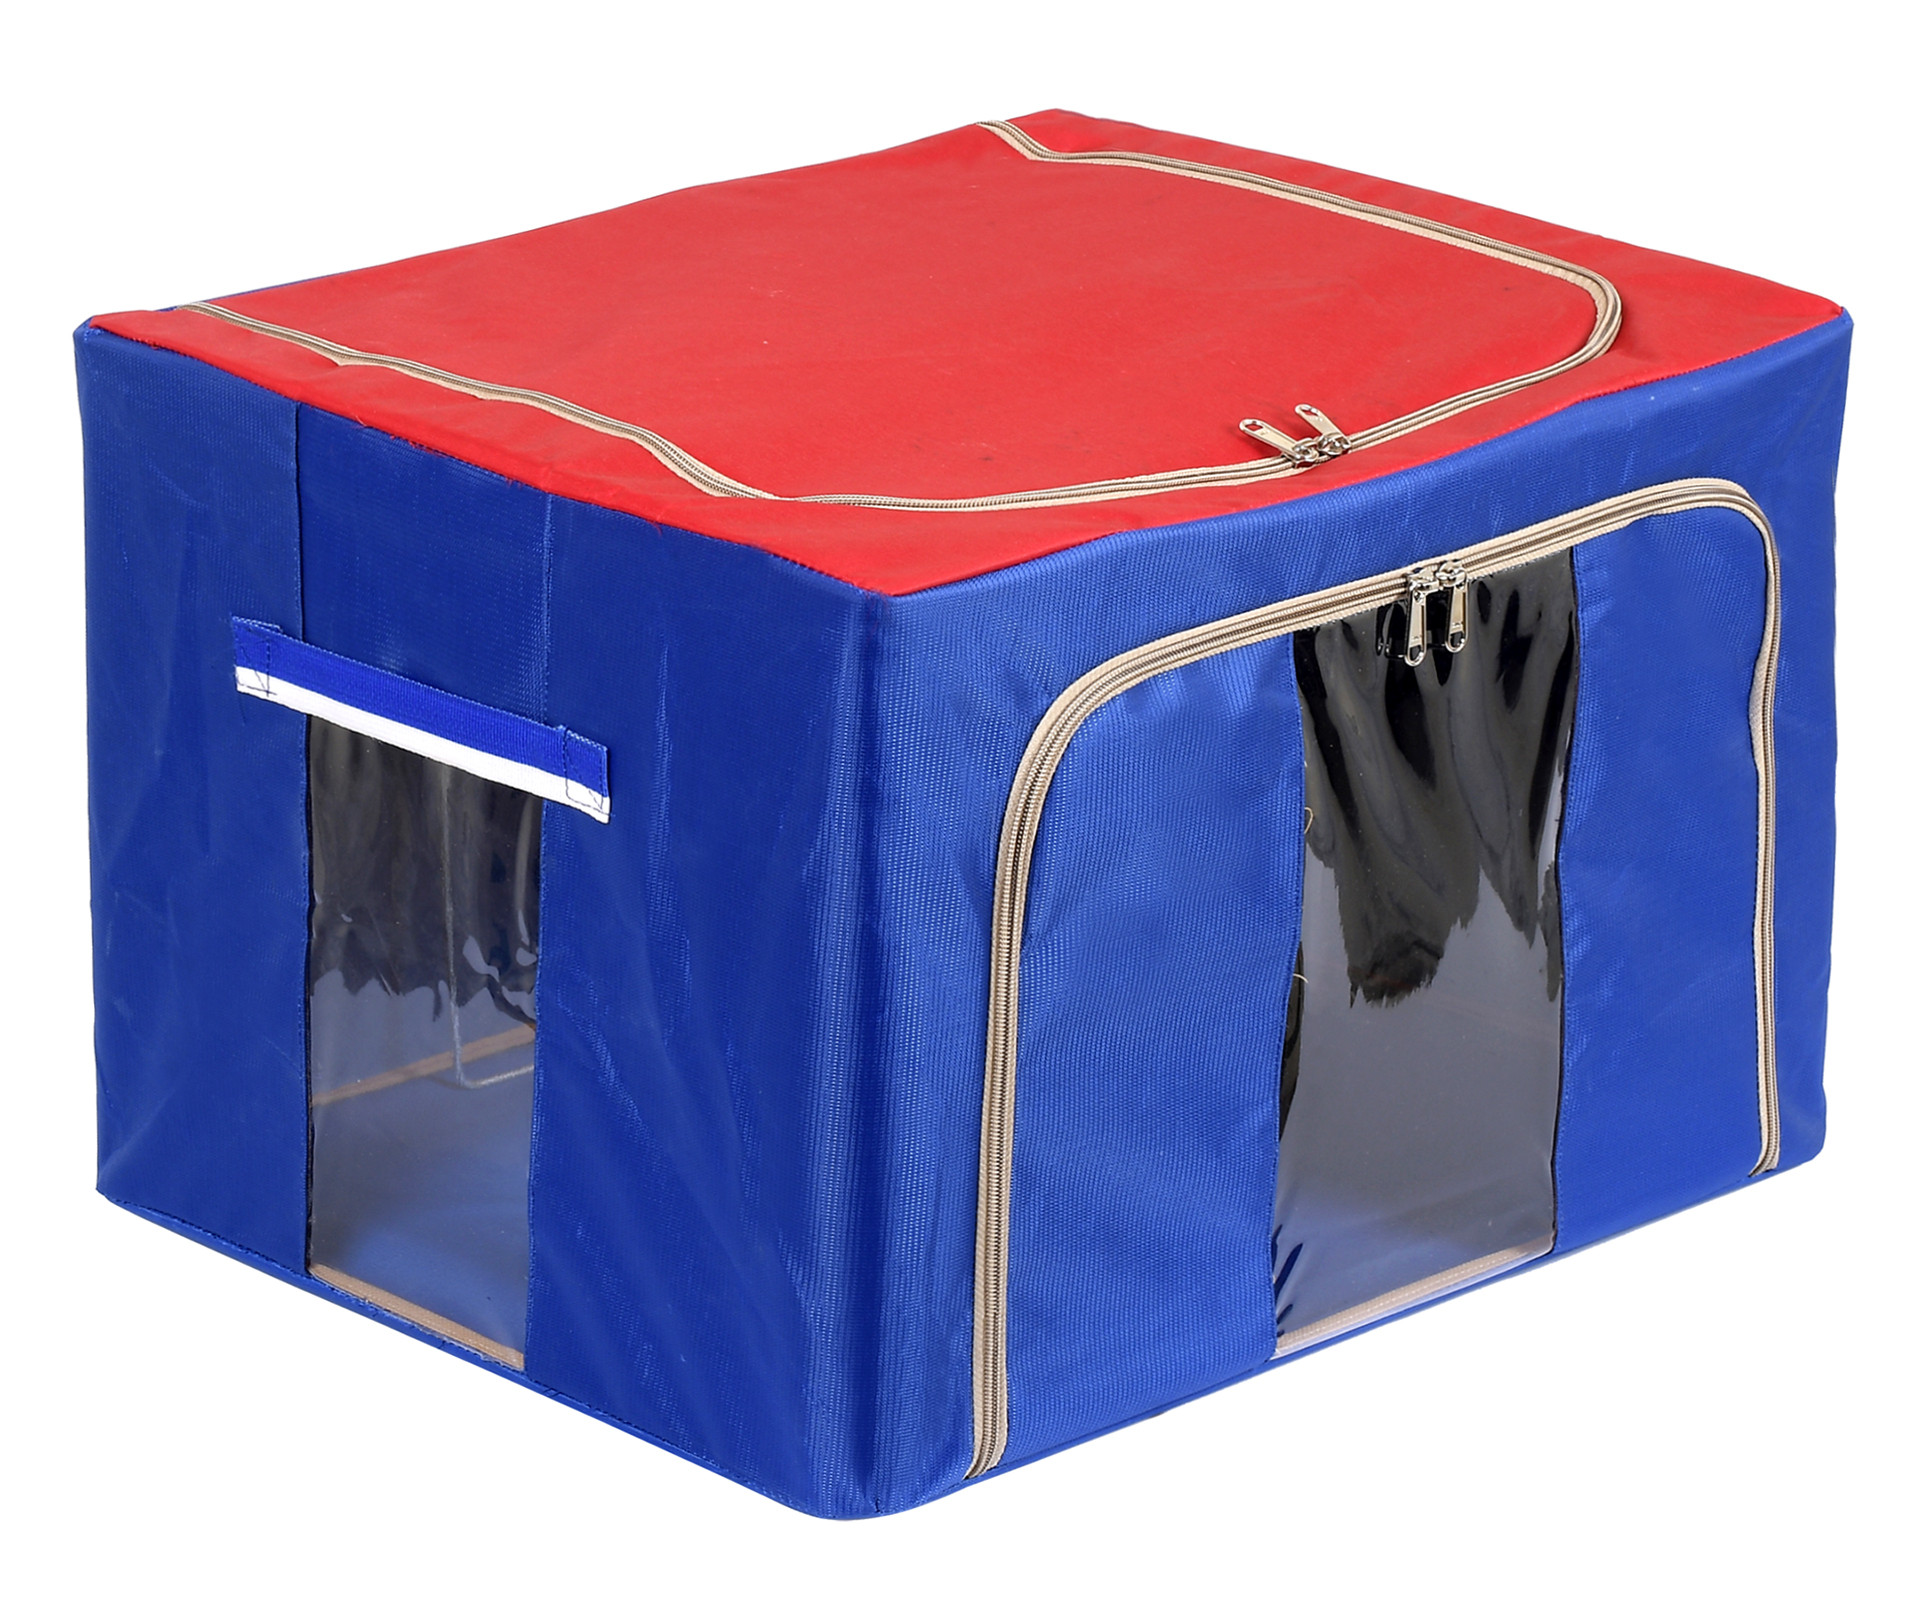 Kuber Industries Steel Frame Storage Box/Organizer For Clothing, Blankets, Bedding With Clear Window, 88Ltr. (Red & Blue)-44KM0321